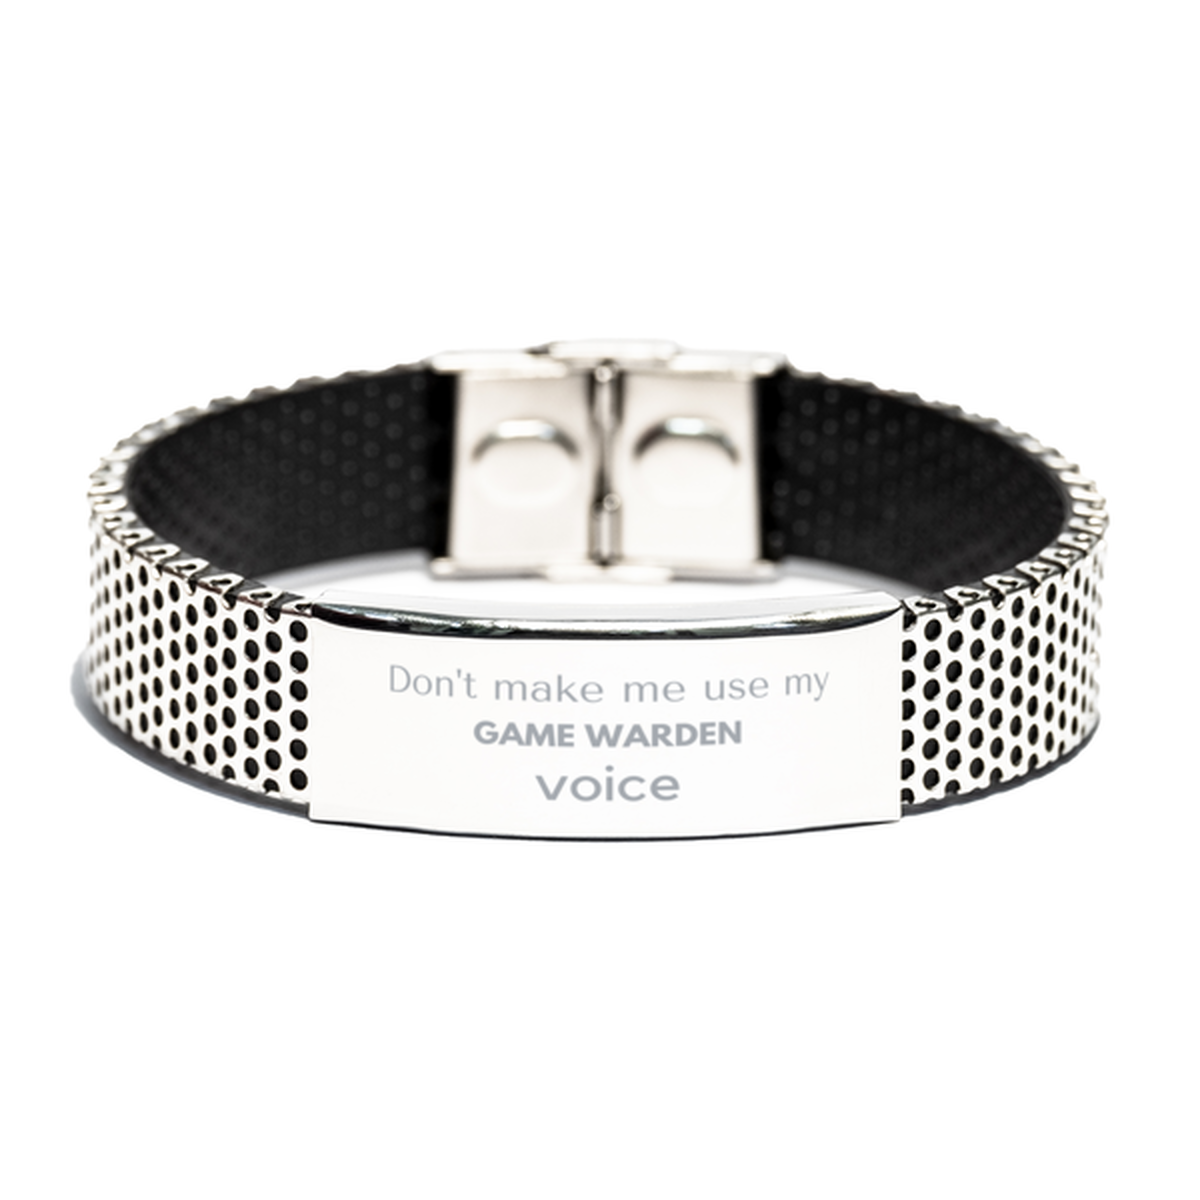 Don't make me use my Game Warden voice, Sarcasm Game Warden Gifts, Christmas Game Warden Stainless Steel Bracelet Birthday Unique Gifts For Game Warden Coworkers, Men, Women, Colleague, Friends